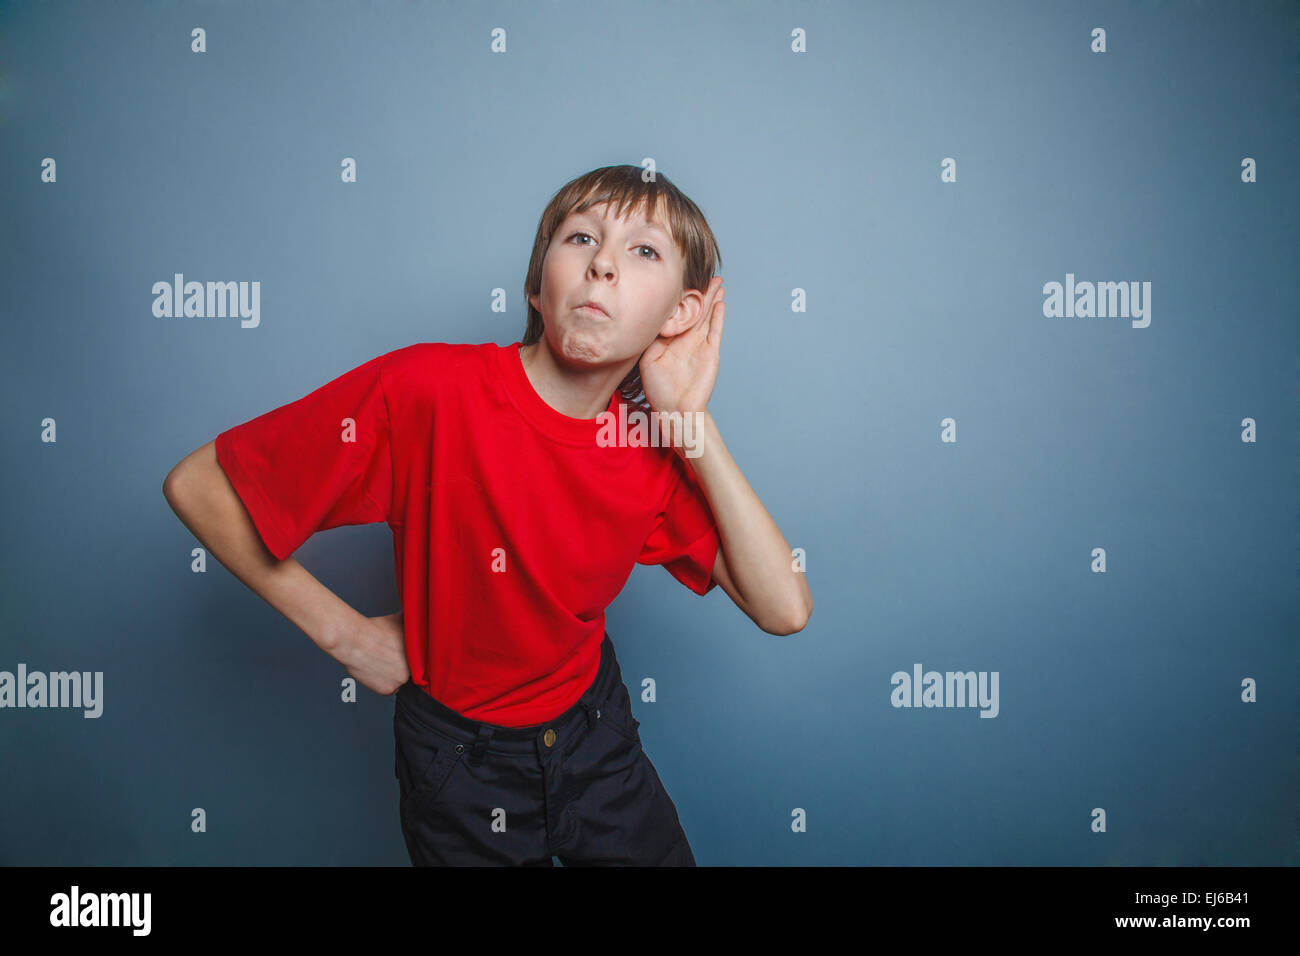 Boy, teenager, twelve years old, in a red shirt, holding hand Stock Photo